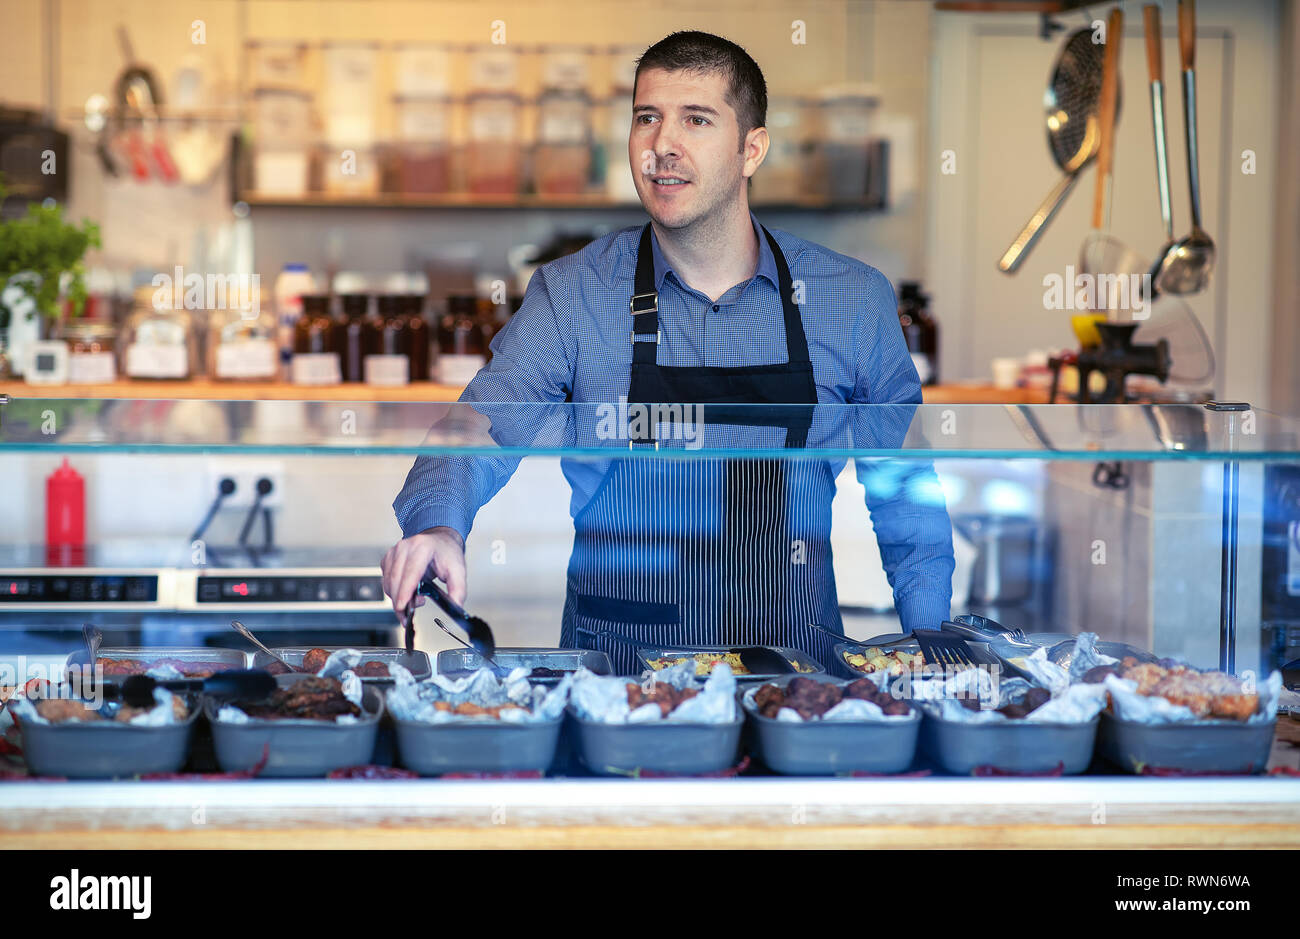 Employee working with kebab, vegetables and oriental food at bistro. Employee wearing apron at counter Stock Photo